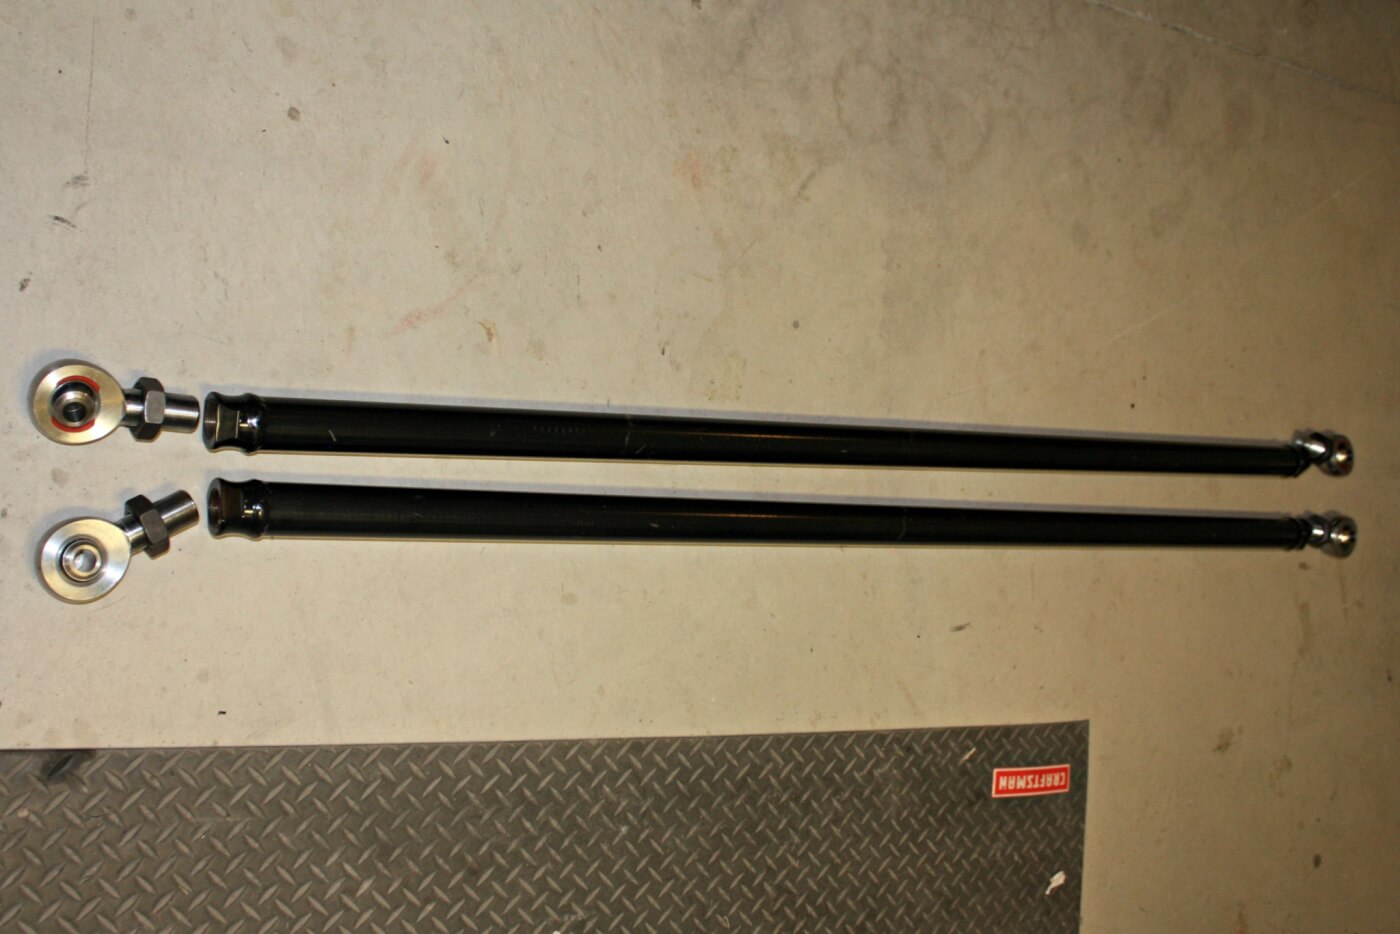 6. For GM applications, Longhorn Fab Shop offers two lengths of traction bars, both offered in their standard or professional grade kits. For short bed trucks, a 72-inch bar and long bed applications get an 86-inch bar. The 2-inch heavy wall tubes are pre-welded with threaded bungs and powdercoated.